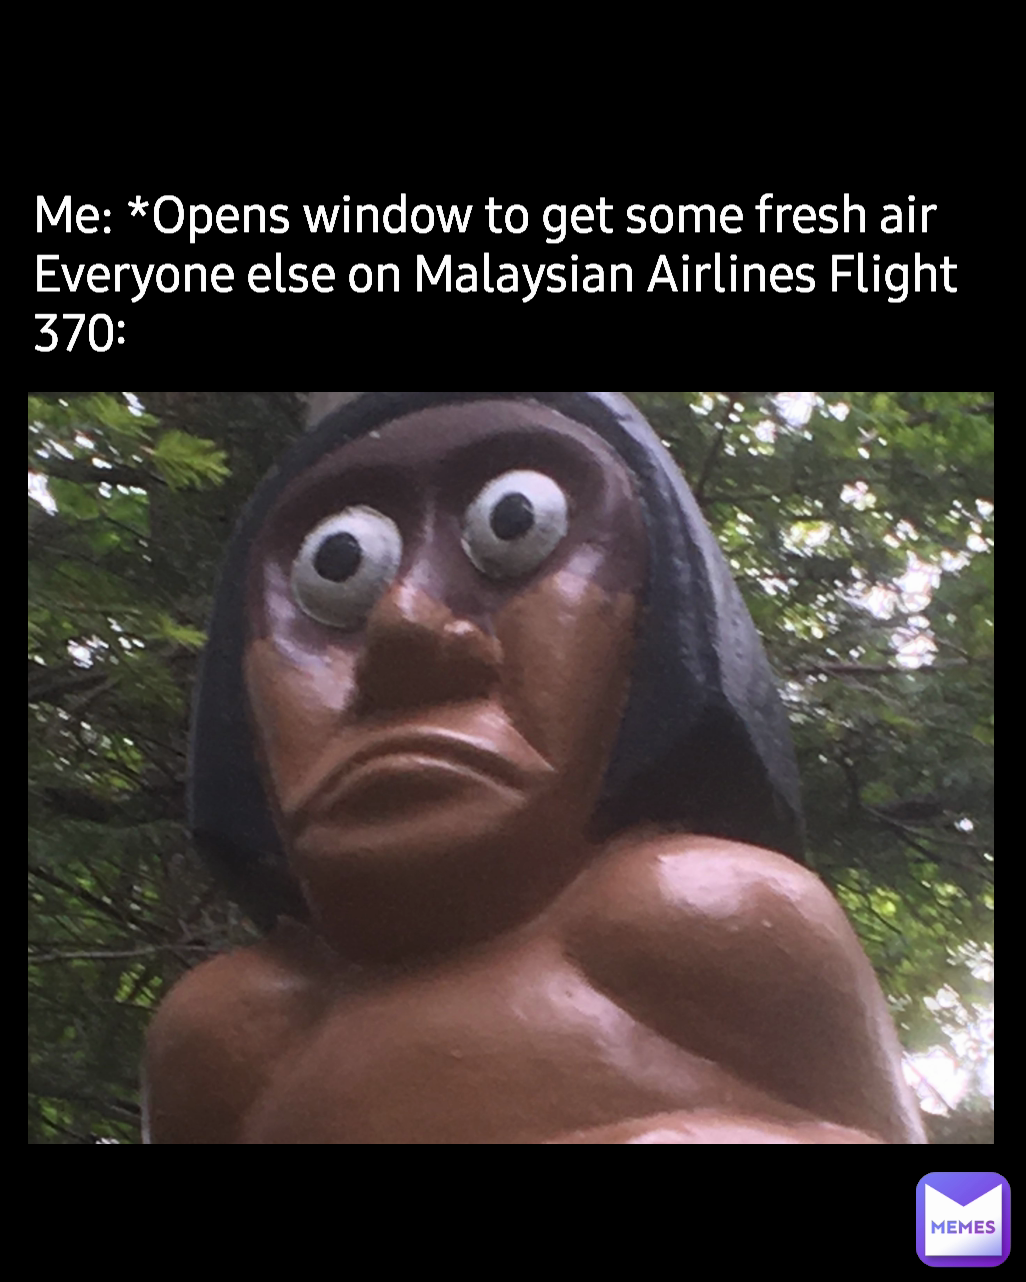 Me: *Opens window to get some fresh air
Everyone else on Malaysian Airlines Flight 370: